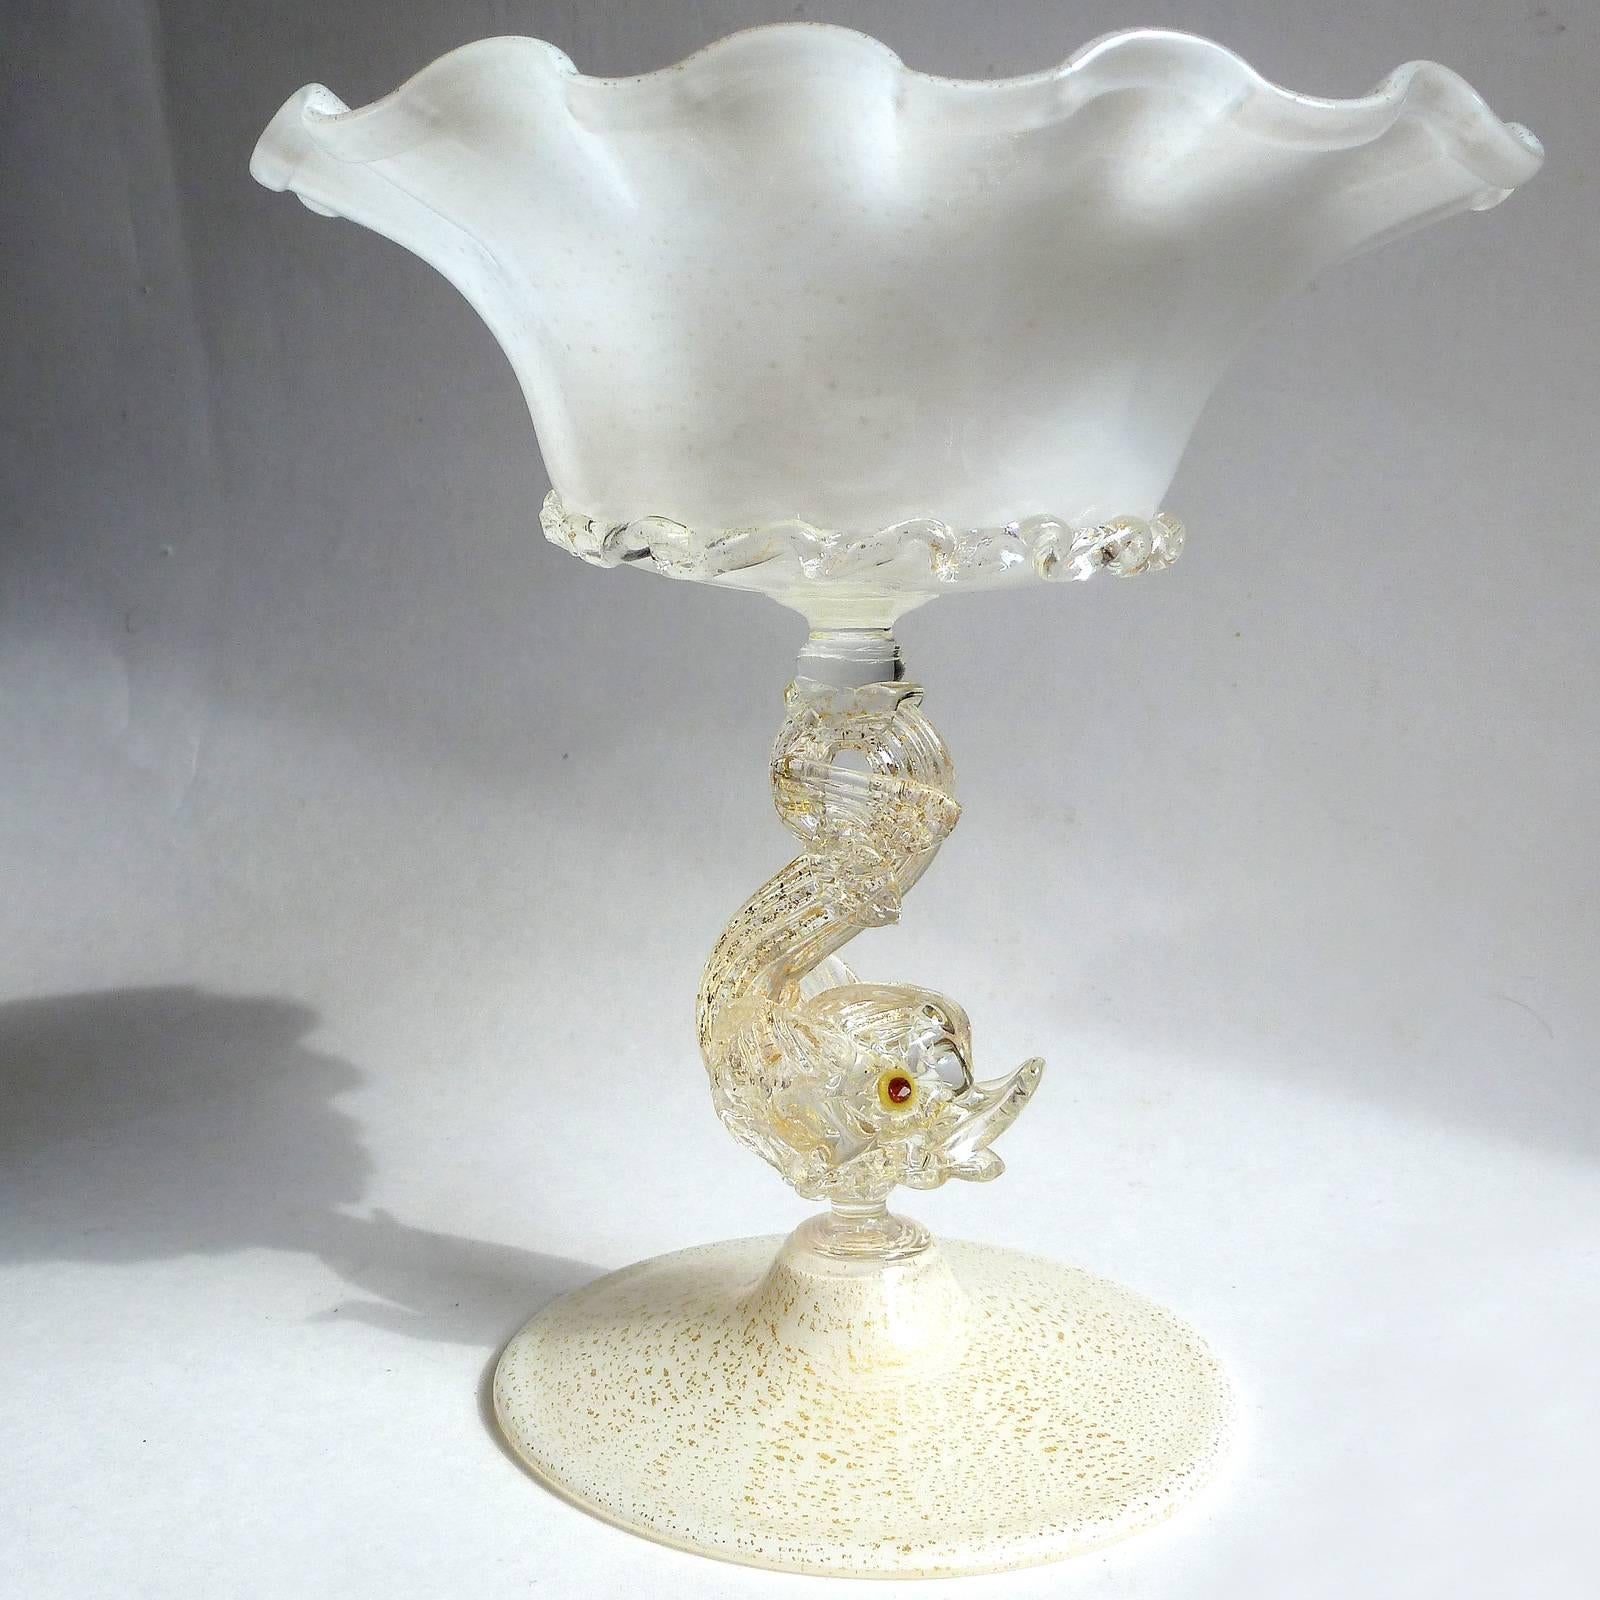 Priced per item (2 available as shown). Gorgeous early Murano hand blown white and gold flecks Italian art glass compote bowls with fish stems decoration. Both are almost identical, except one is a little taller. They have an applied rigaree ribbon